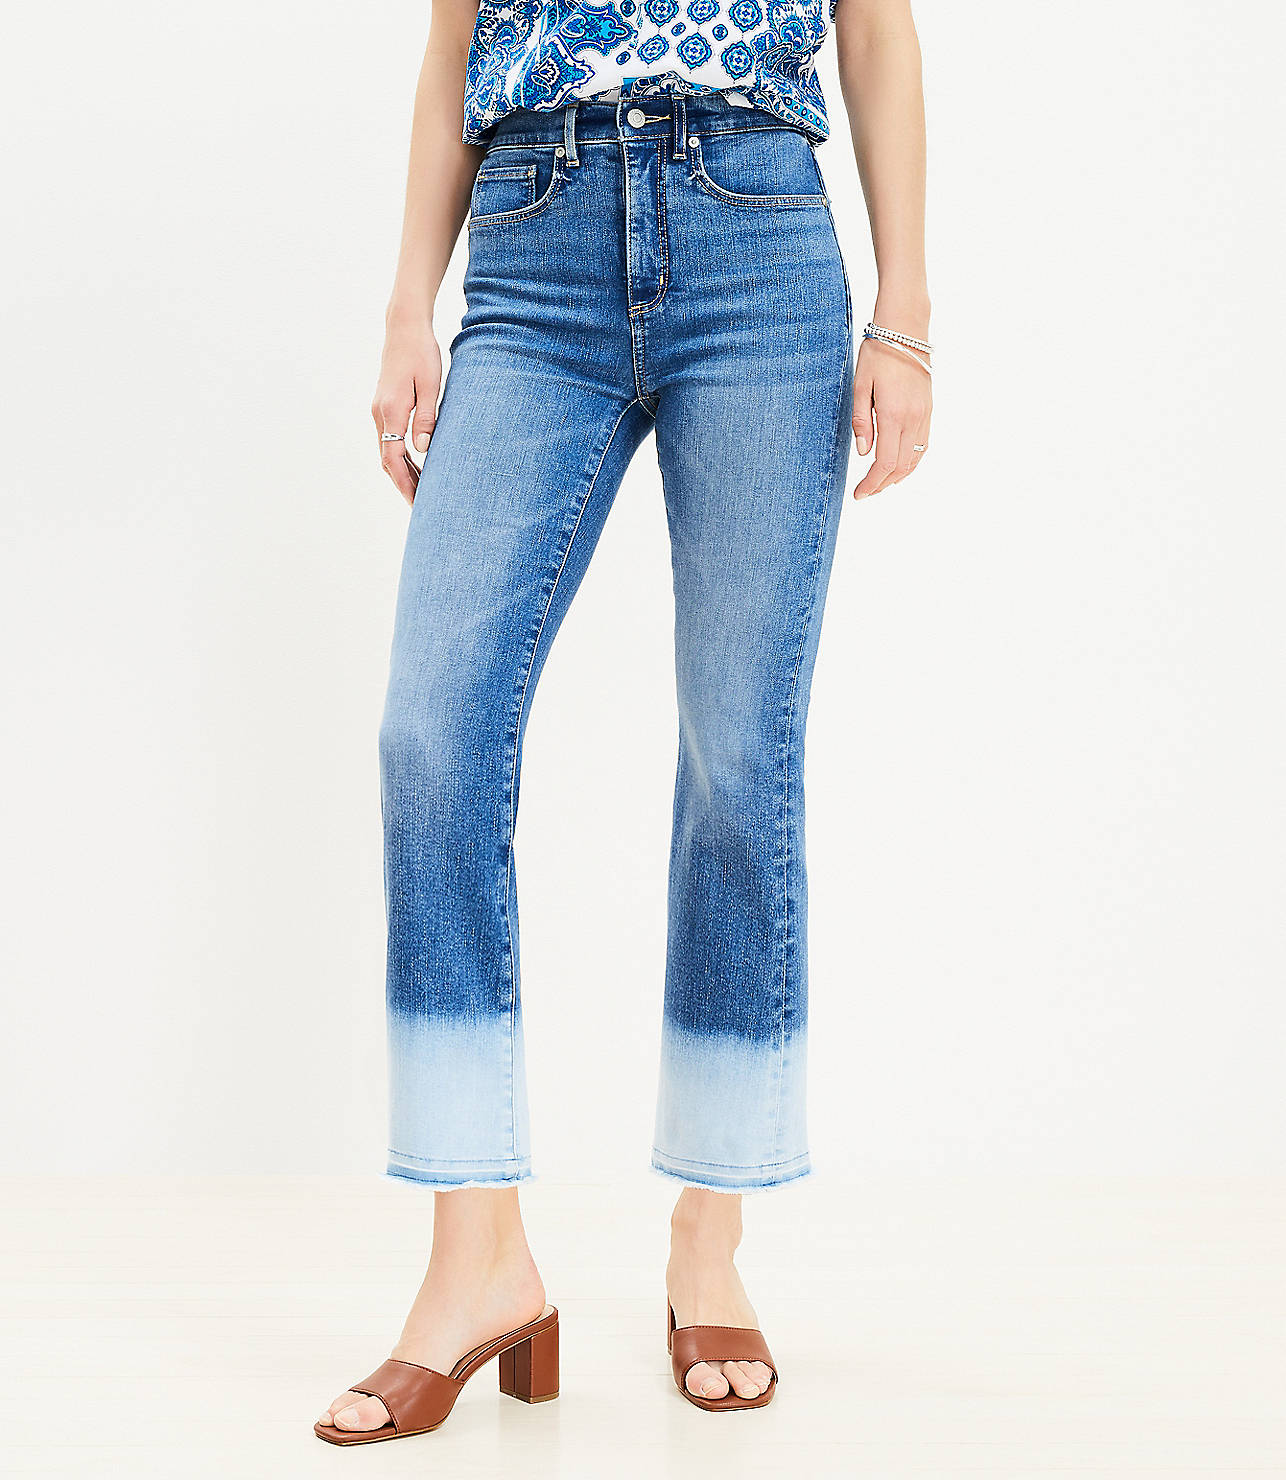 Let Down Hem High Rise Kick Crop Jeans in Bleach Out Wash